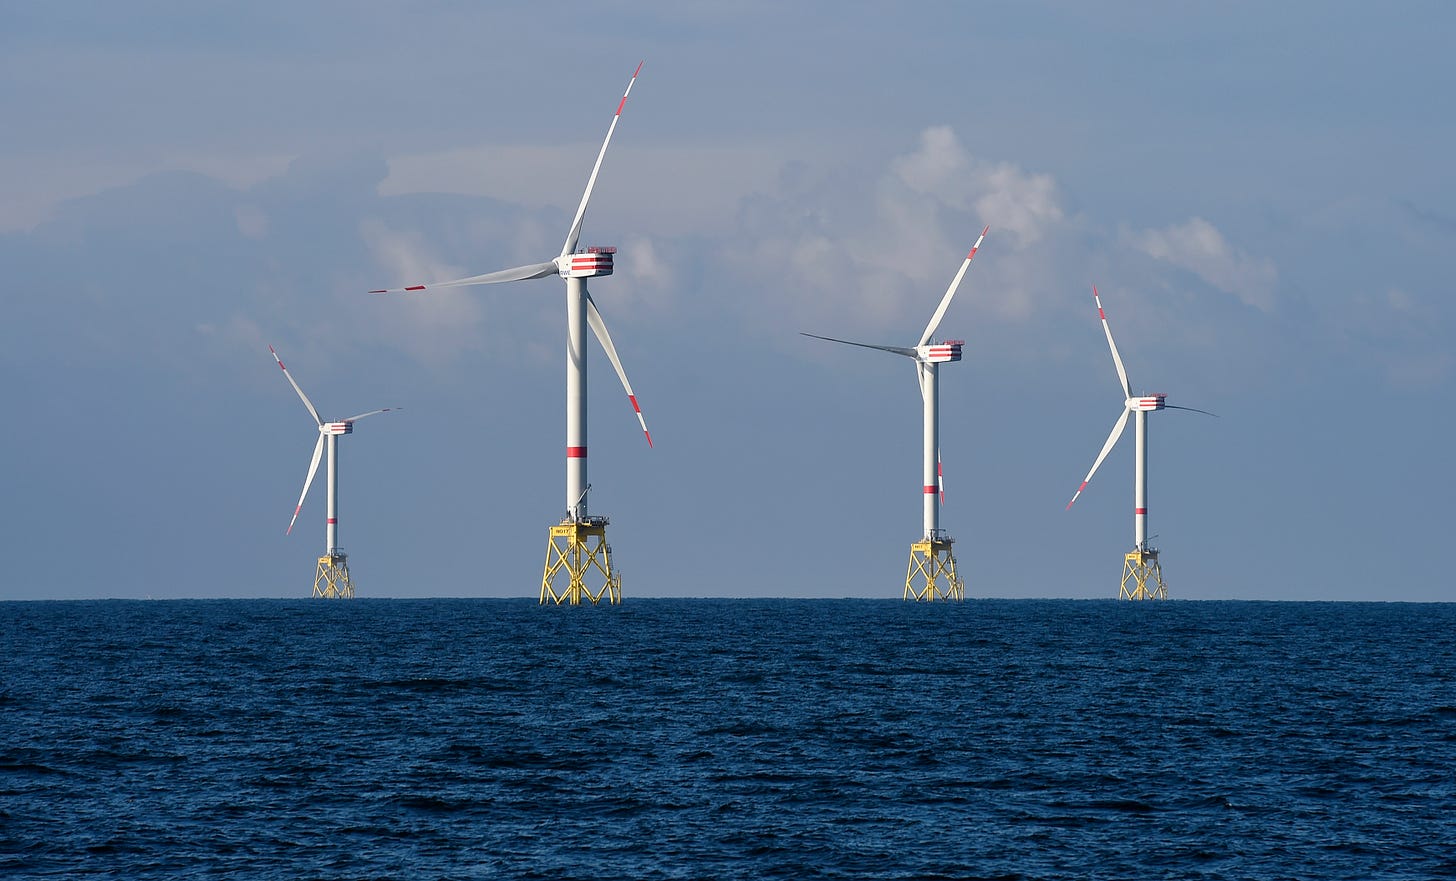 A view shows windmills of several wind farms at the so-called "HelWin-Cluster", located 35 kilometres (22 miles) north of the German island of Heligoland November 5, 2014. REUTERS/Fabian Bimmer/Files